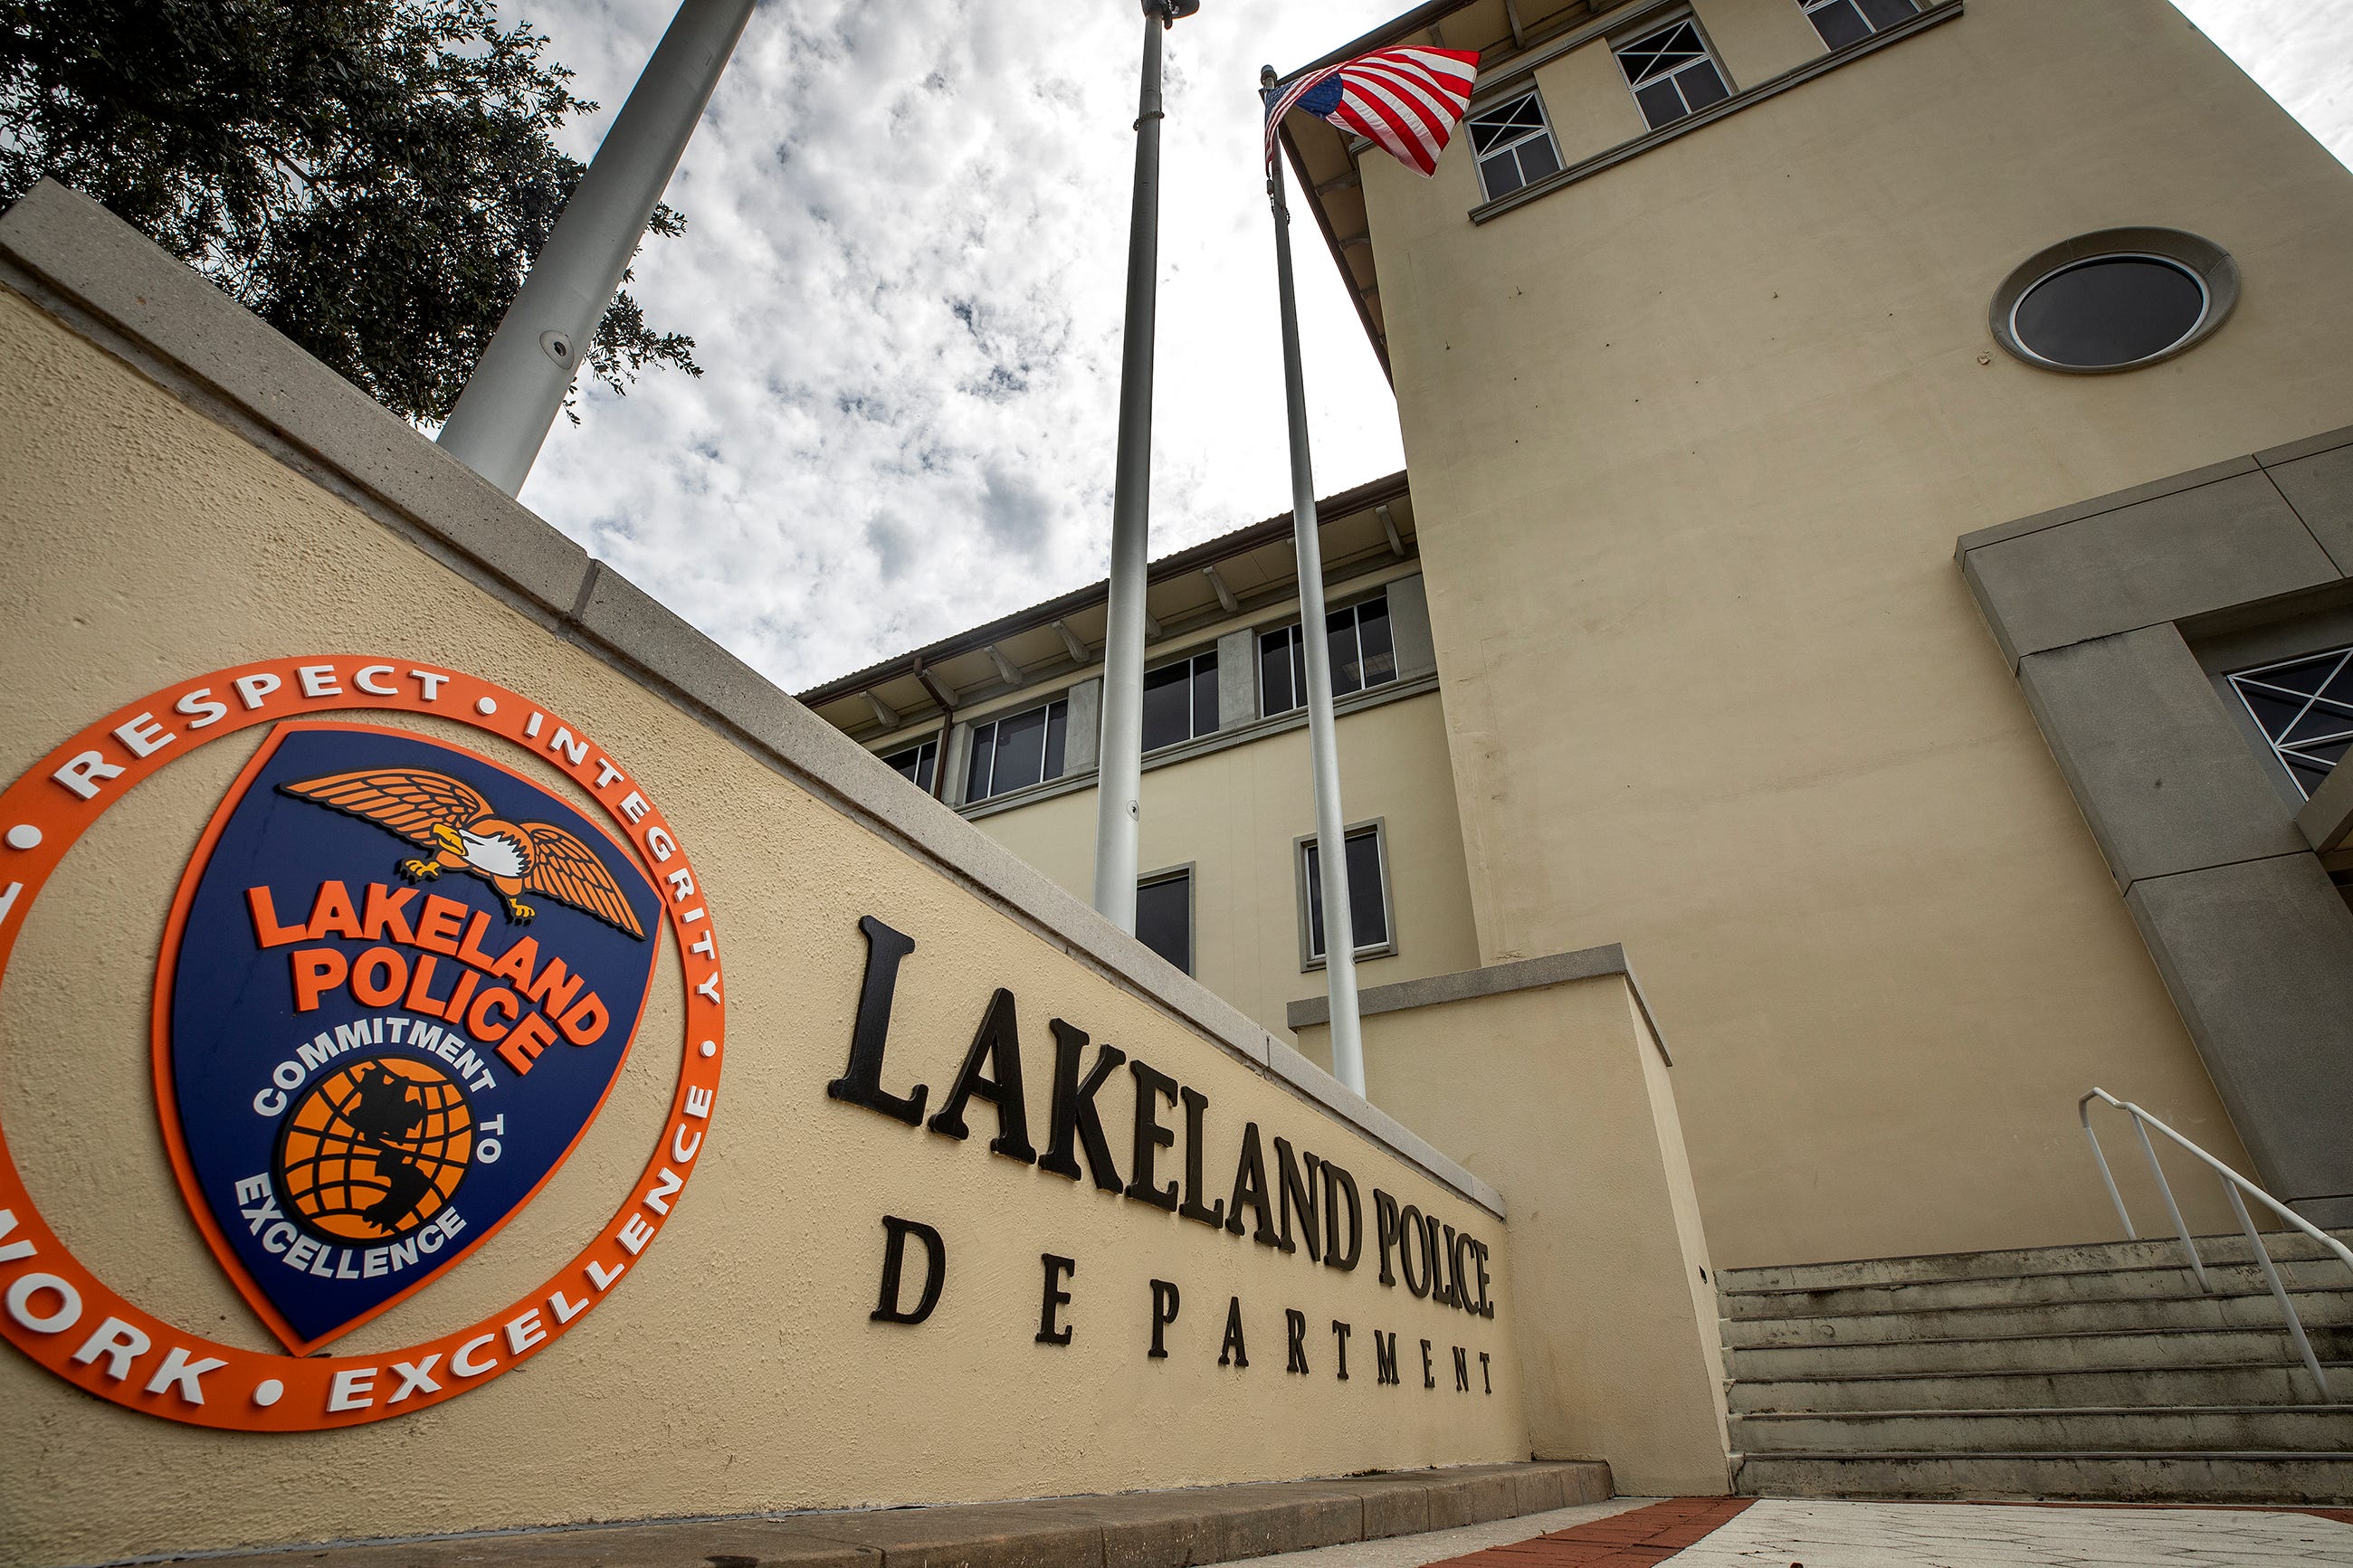 In 2019, the Lakeland Police Department had five Black female and 23 Black male officers, according to FDLE records. This is approximately 11.5% of the city’s 241-member force. Lakeland's population makeup is 20.6% Black, based on racial origin.